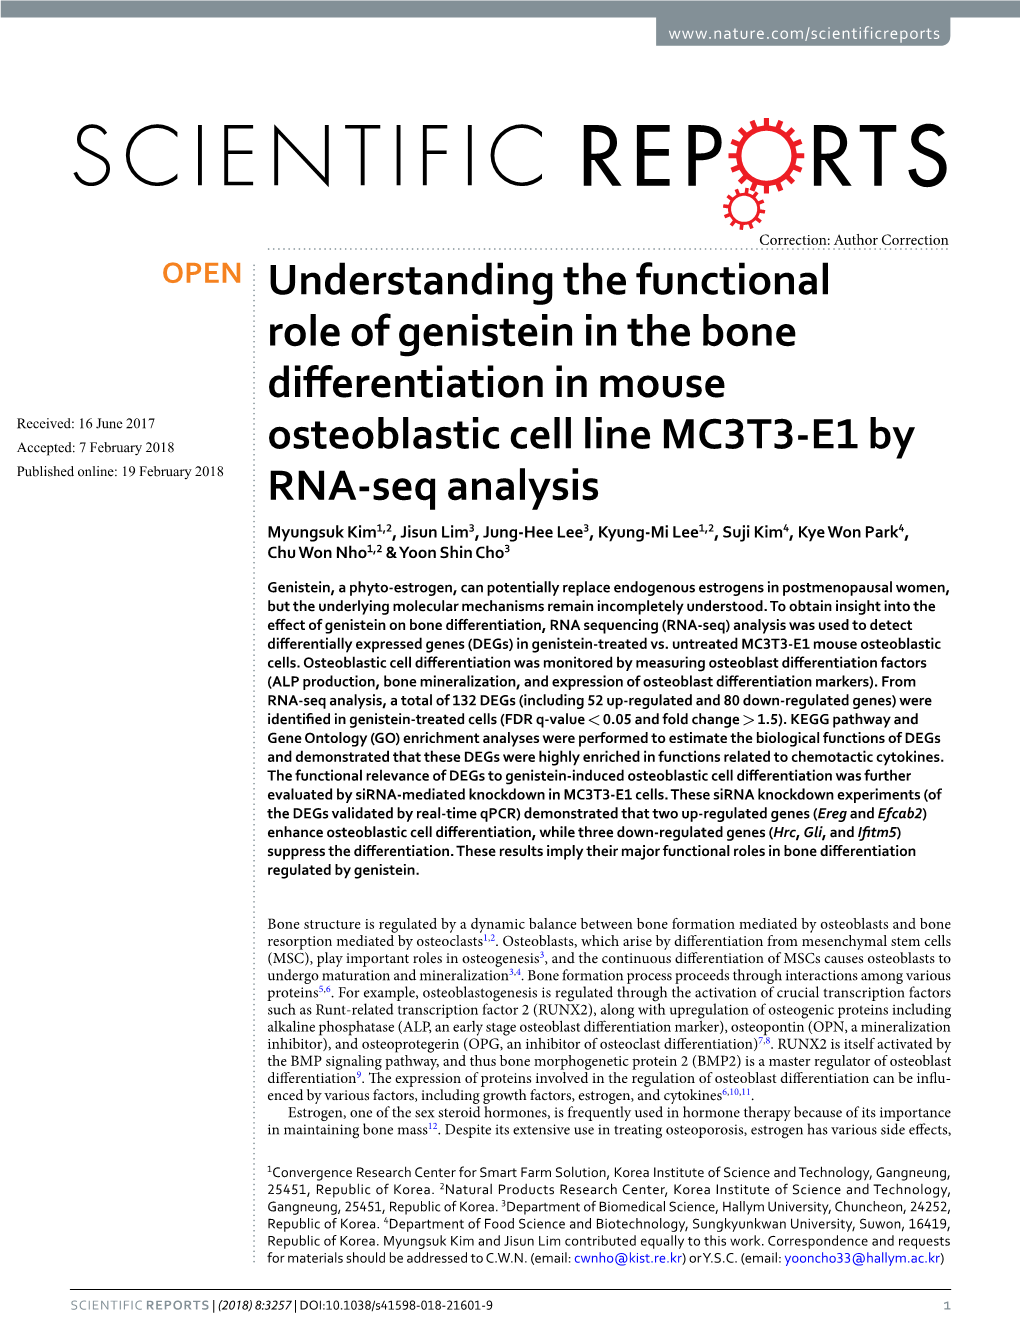 Understanding the Functional Role of Genistein in the Bone Differentiation